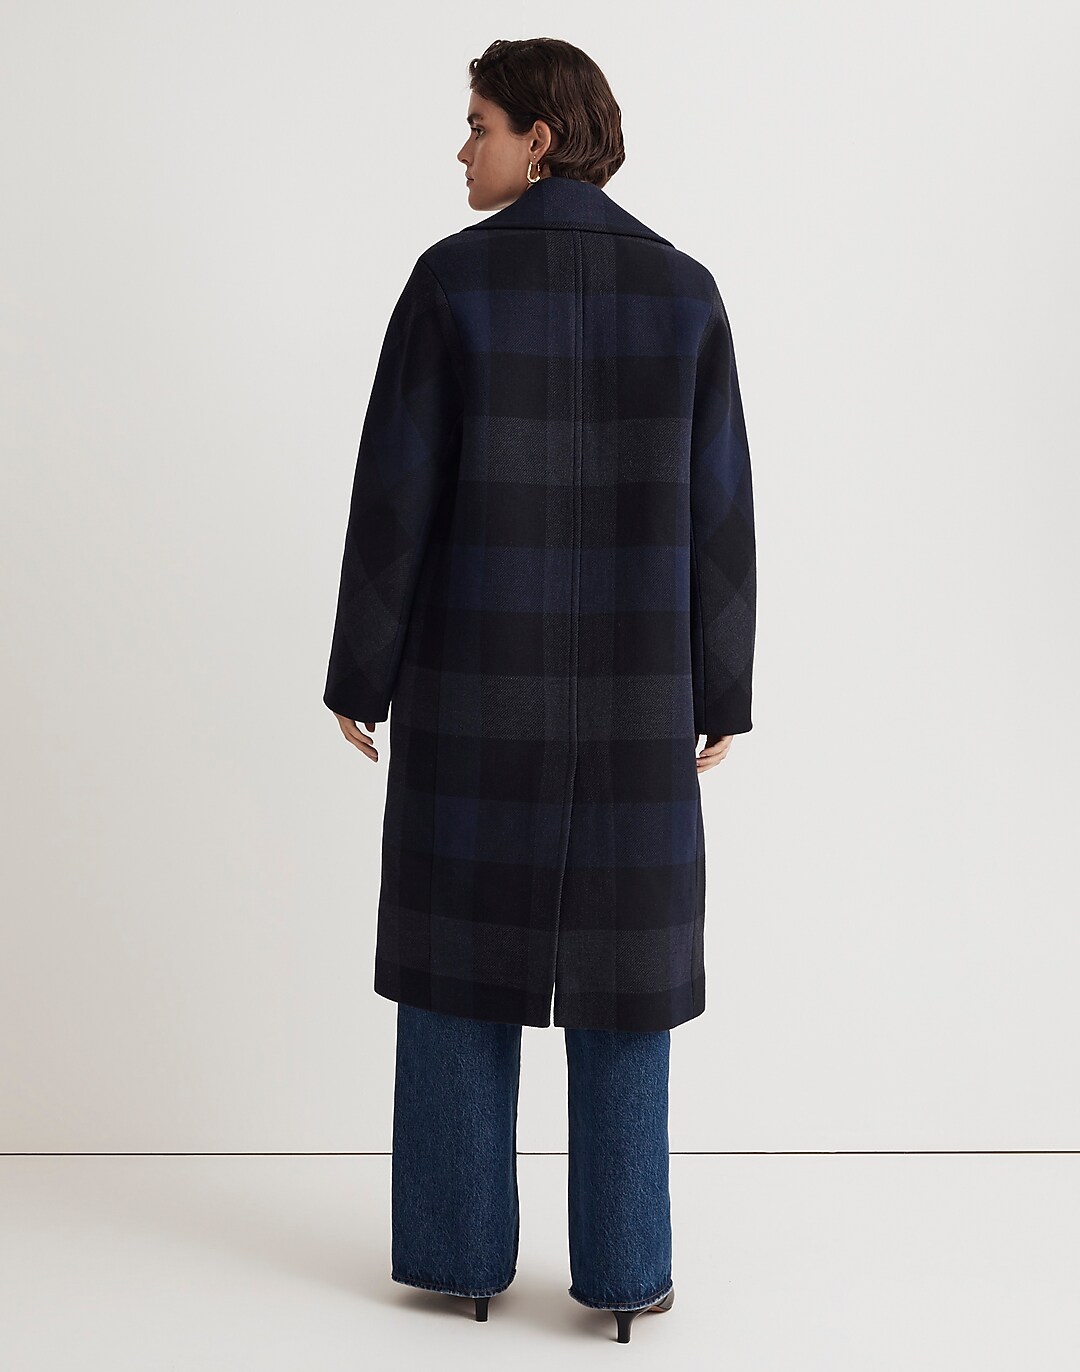 The Gianna Coat in Plaid Insuluxe Fabric